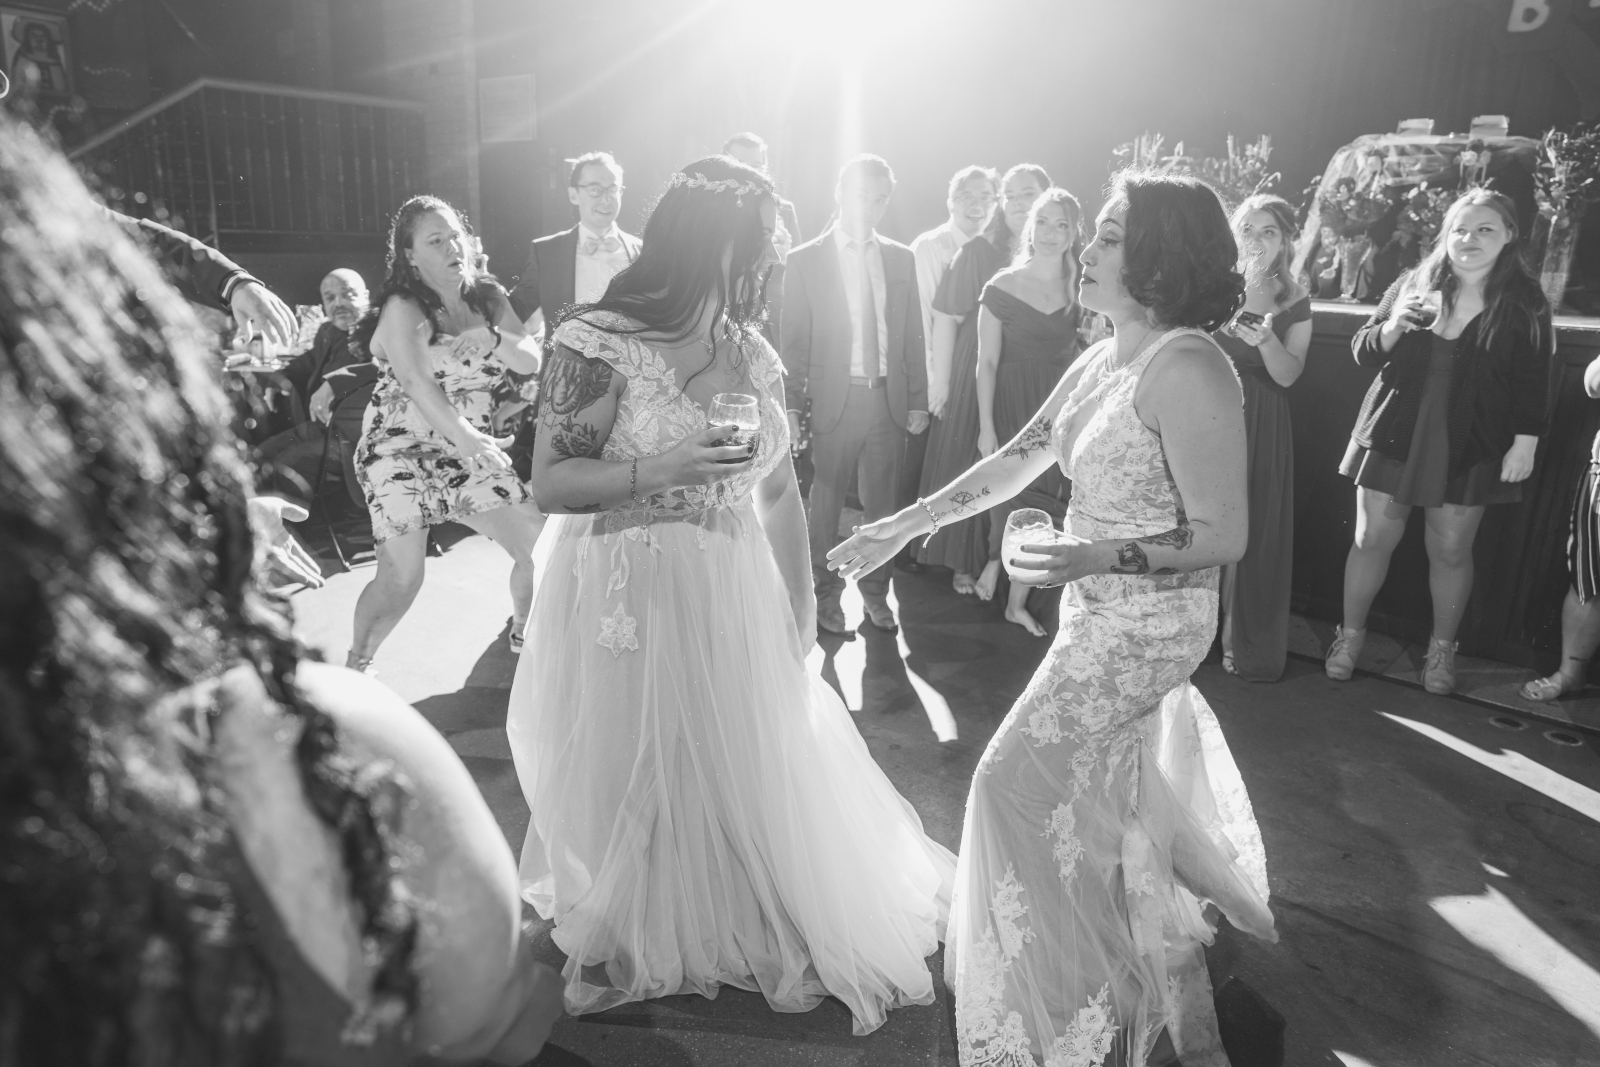 Two brides dance, fun, music, wedding DJ, Sound Precision Entertainment, two wedding dresses, love is love, candid, black and white, beautiful lesbian wedding reception at the House of Blues Cleveland